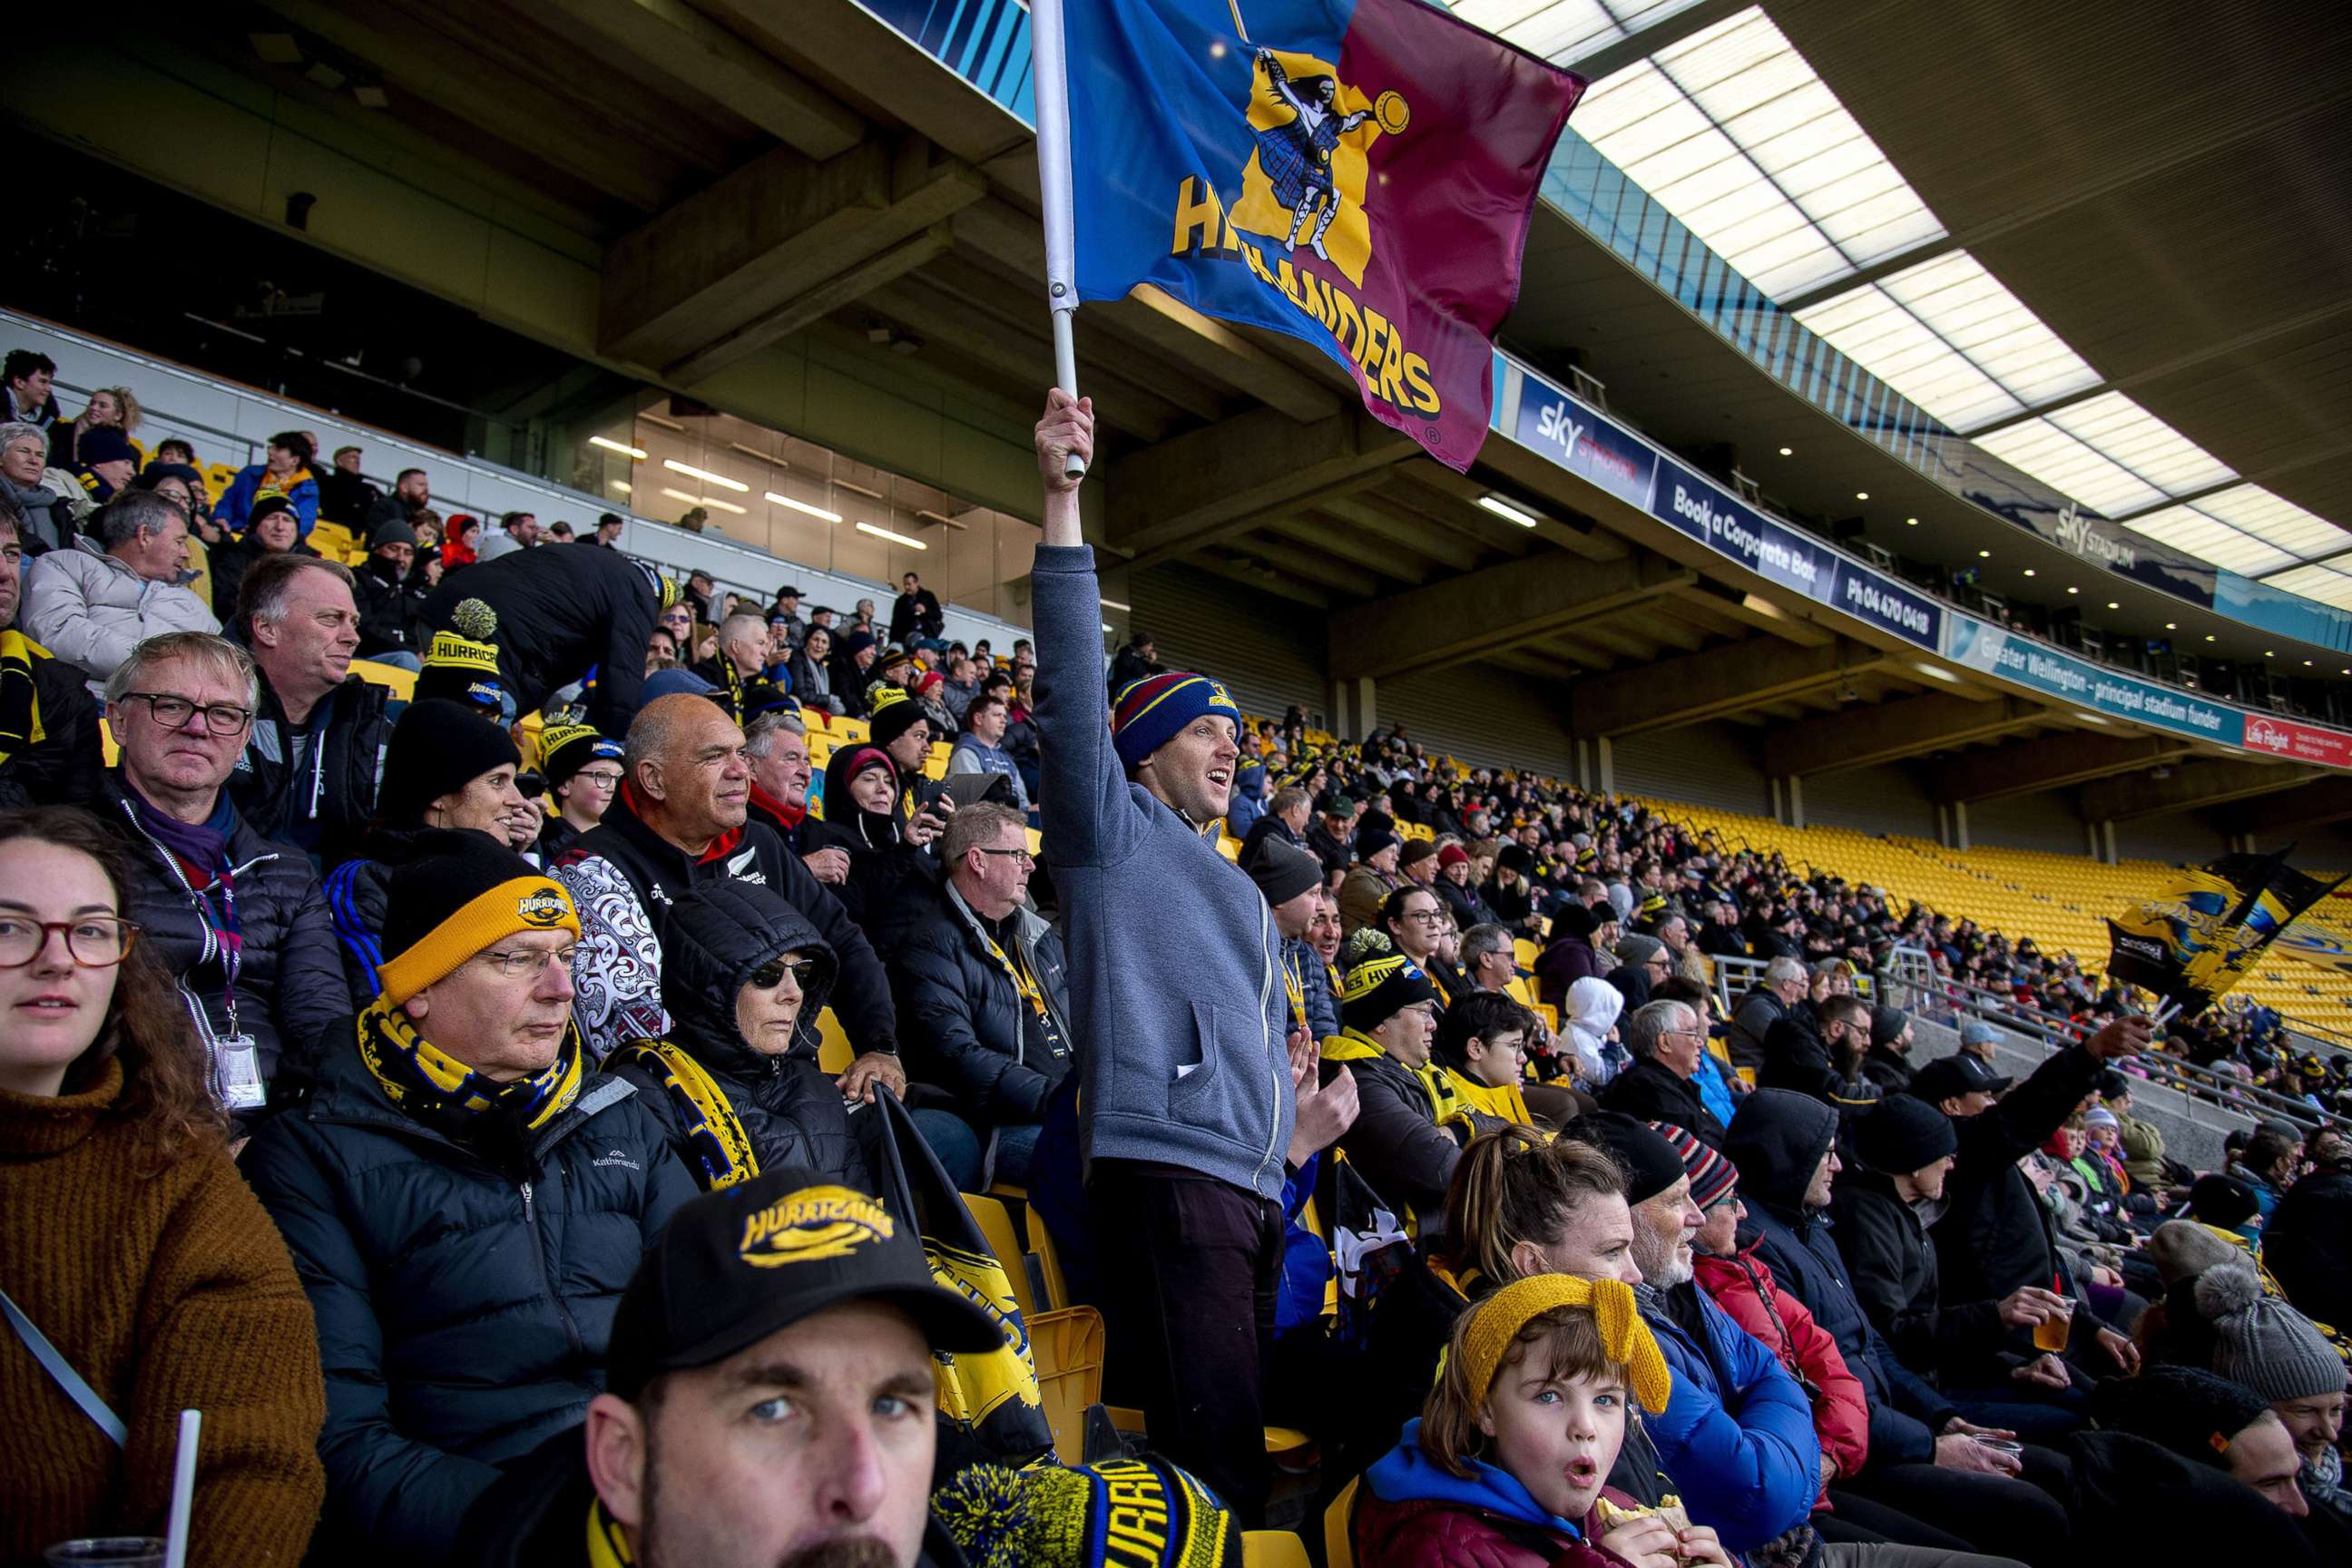 PHOTO: Fans in the grandstand watch the Super Rugby Aotearoa match between the Hurricanes and the Highlanders, at Sky Stadium, Wellington, New Zealand, July 12, 2020.